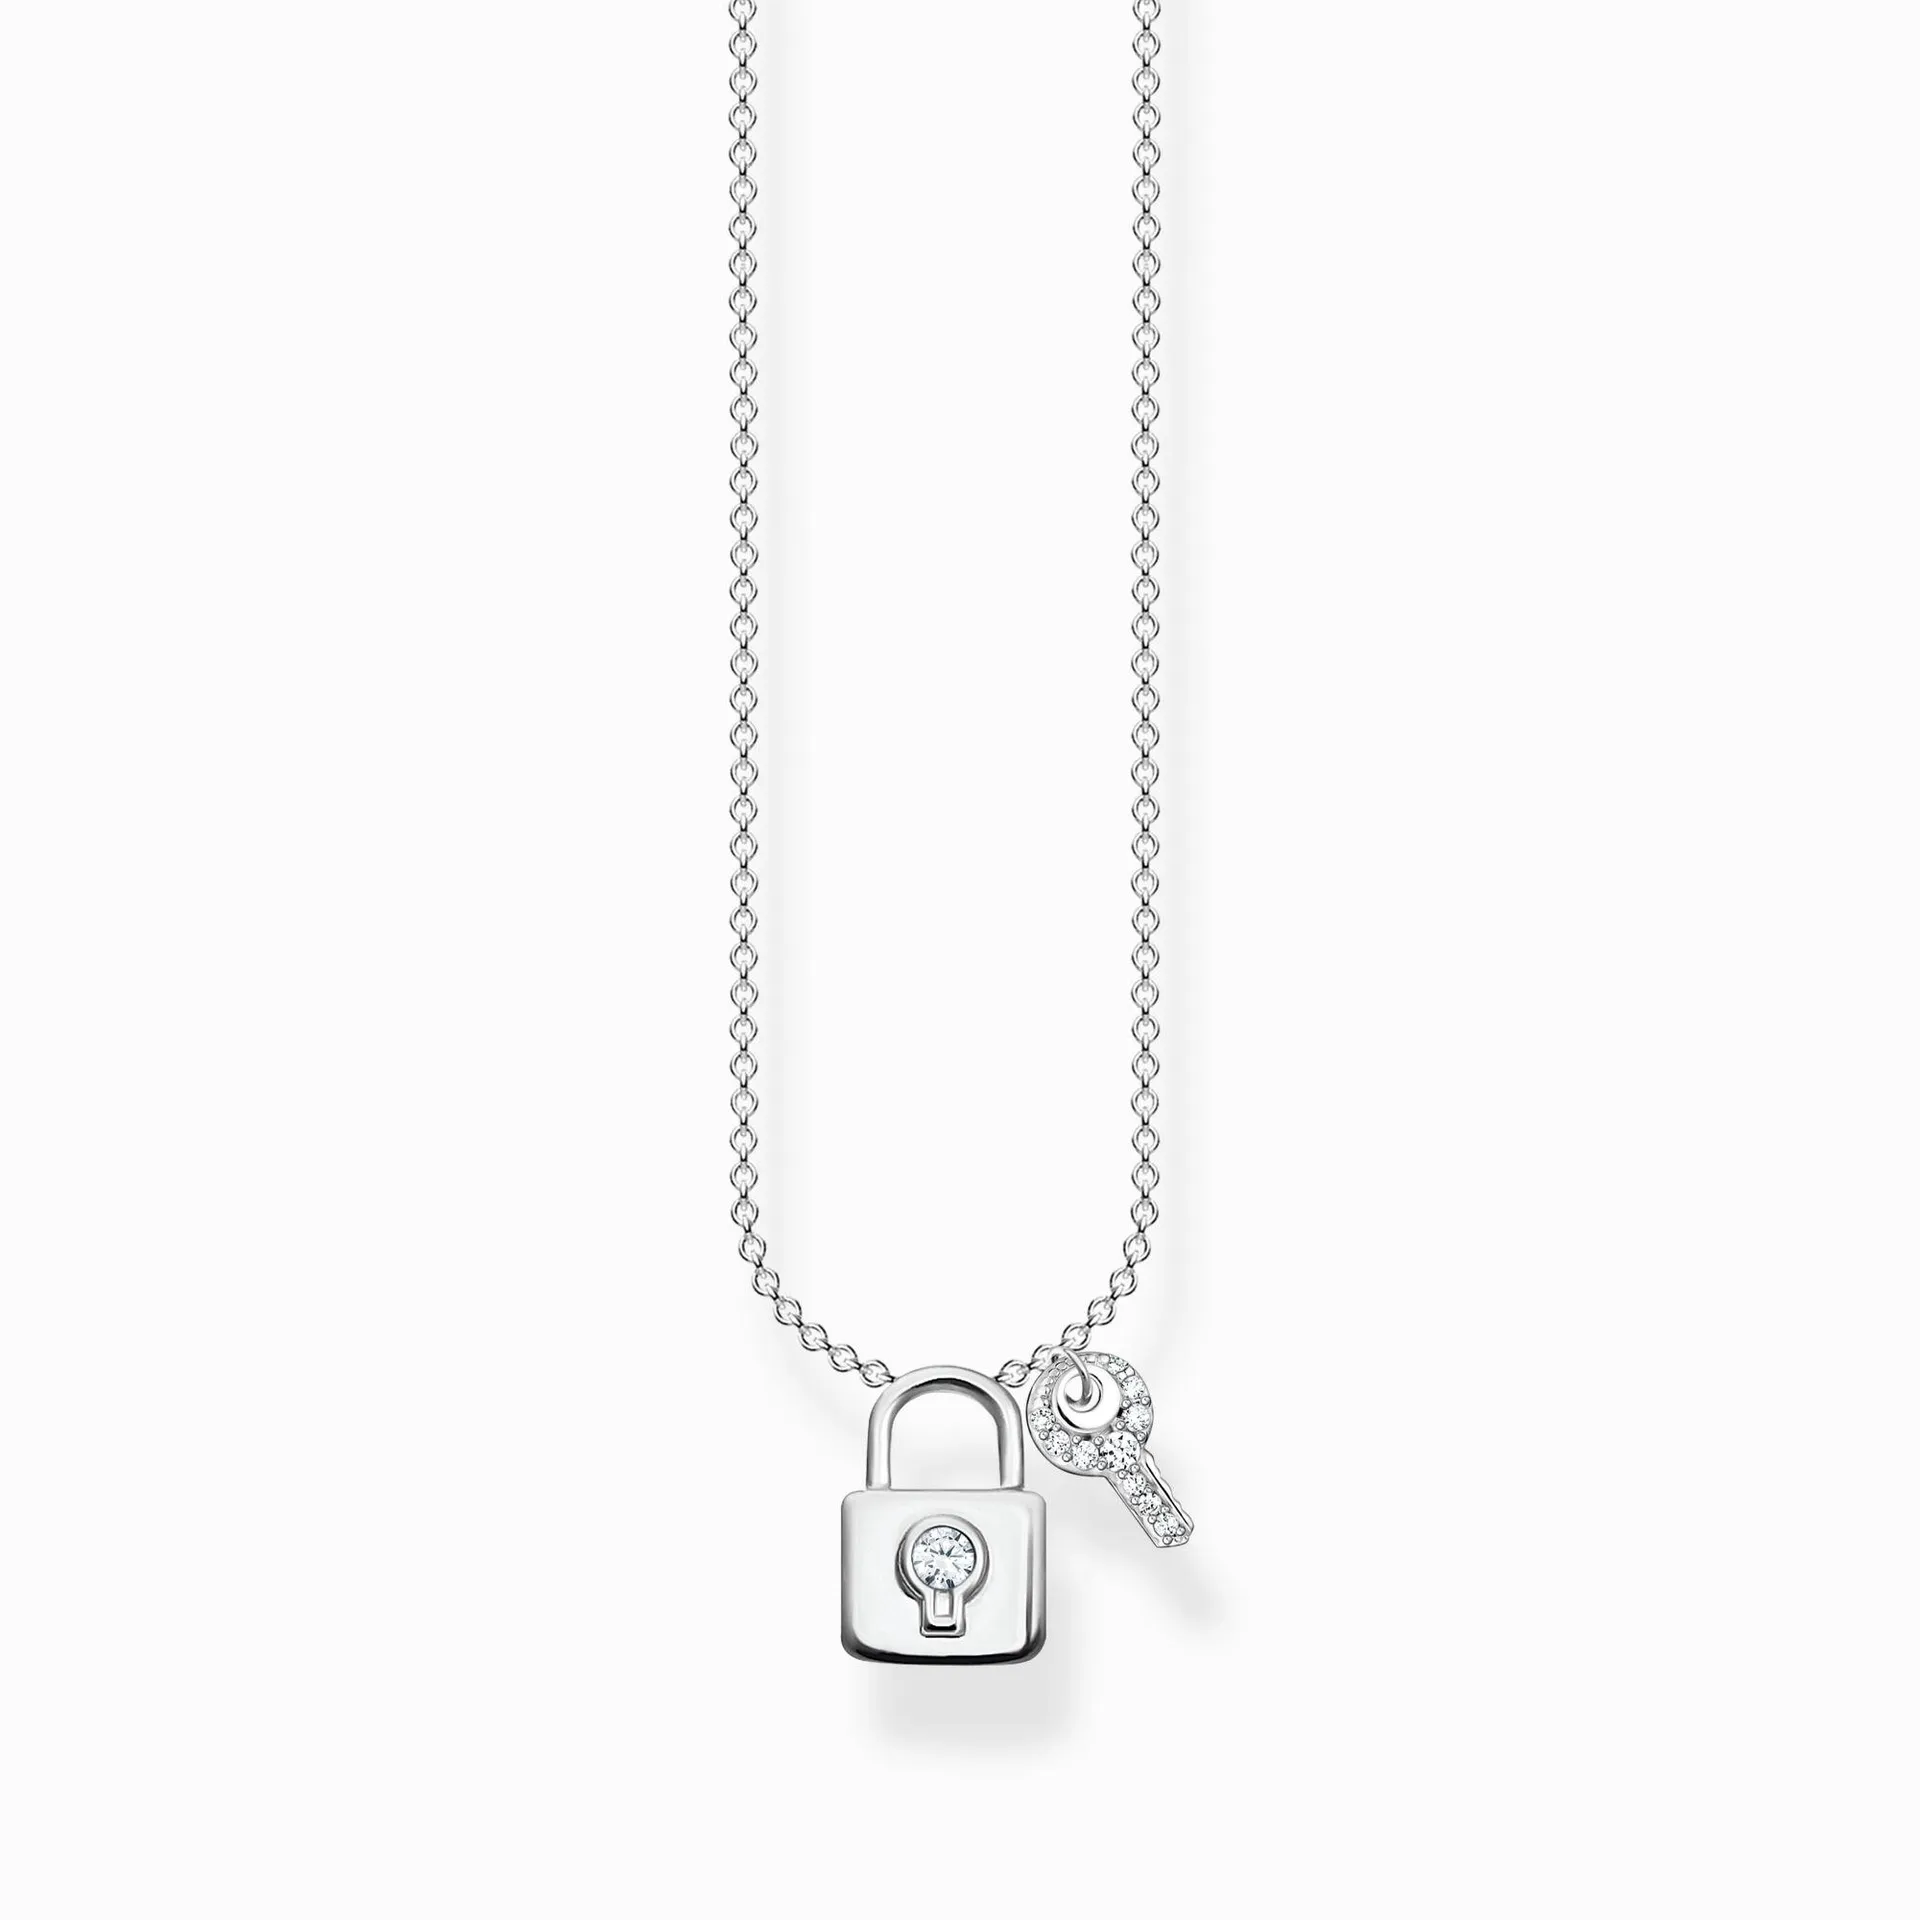 Necklace lock with key silver